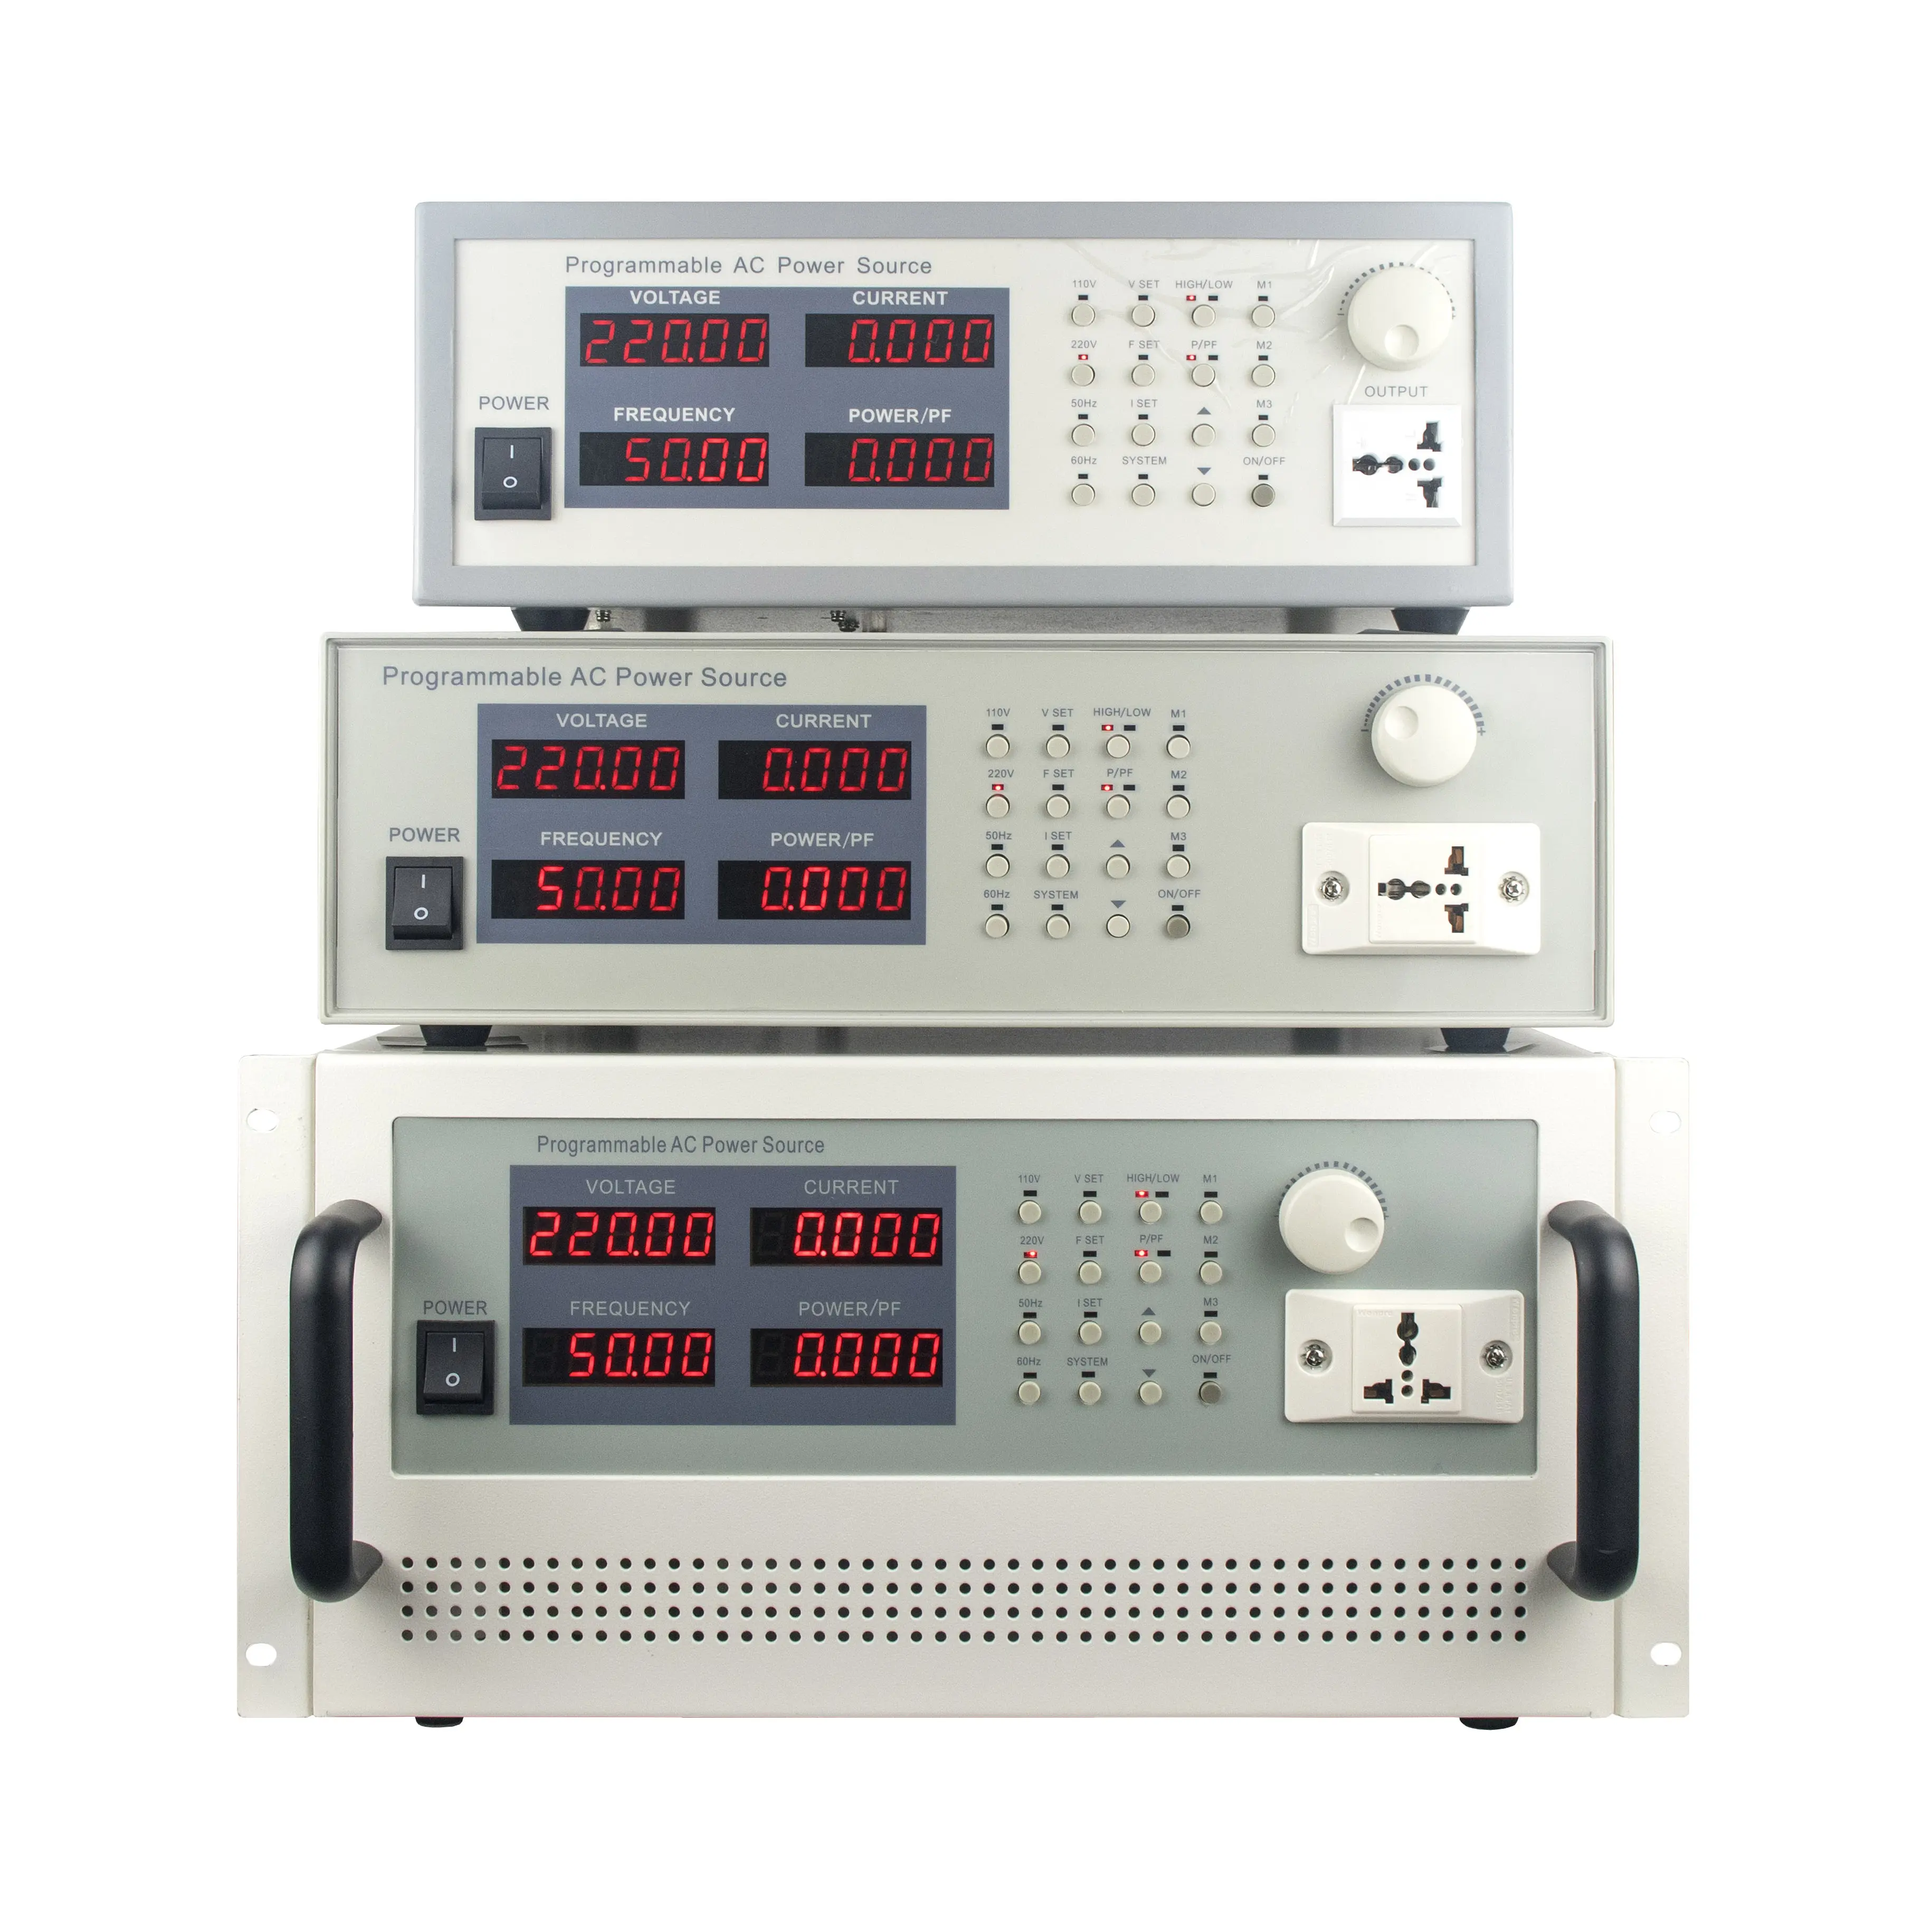 APS-5103 3KVA 220V 50Hz 60Hz Single Phase High Voltage Lab Programmable Variable frequency AC Power Source